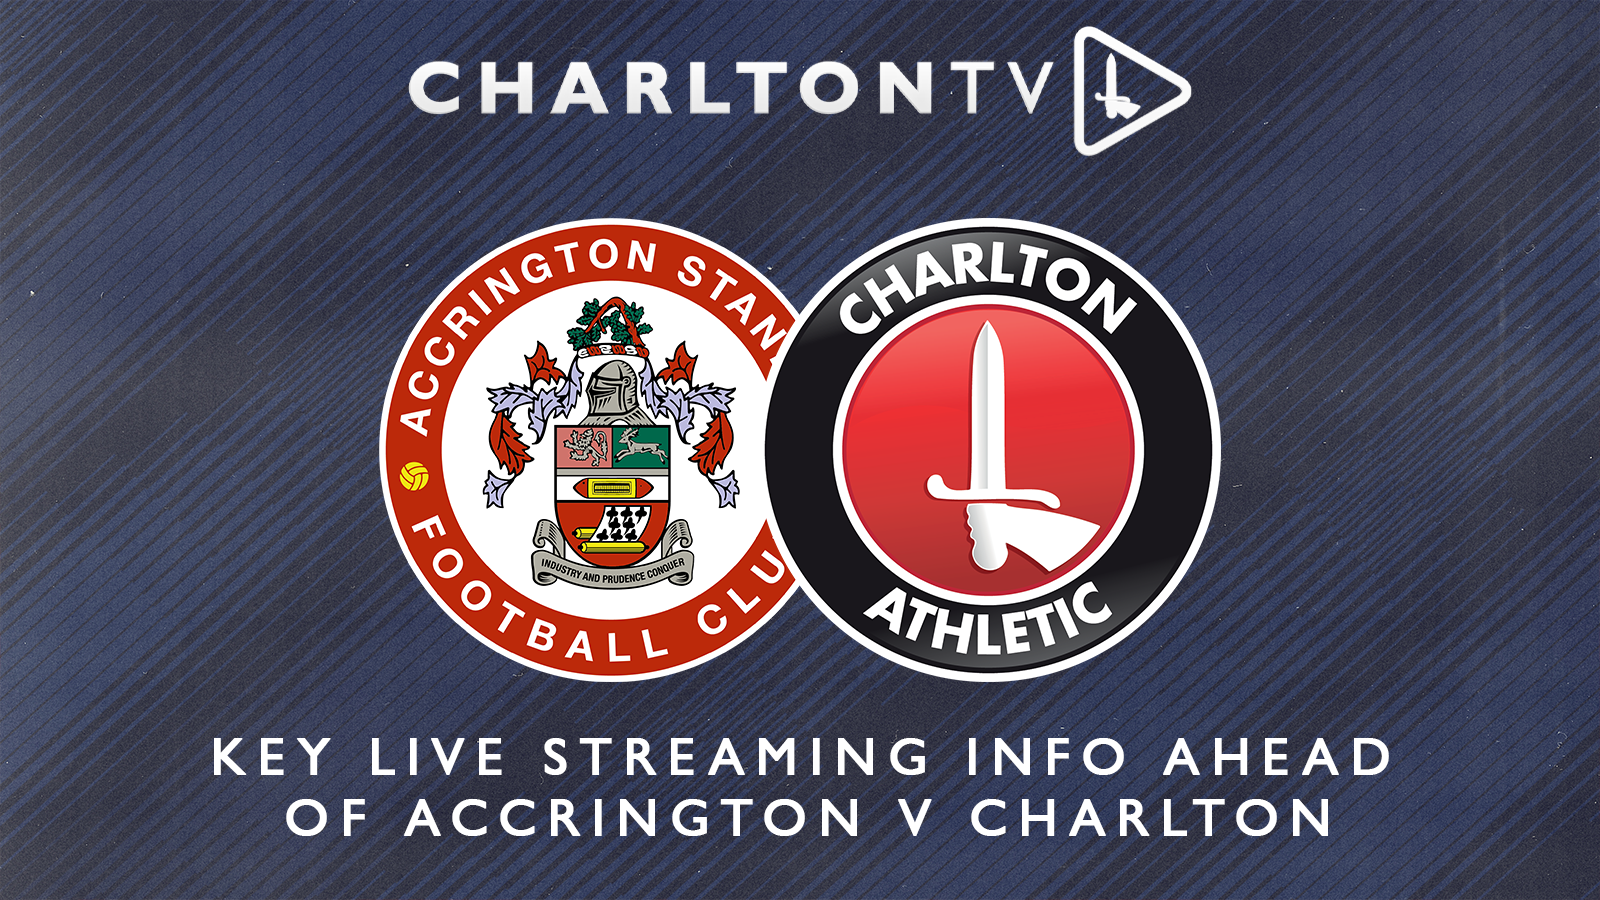 CharltonTV FAQs graphic for Accrington Stanley (a)